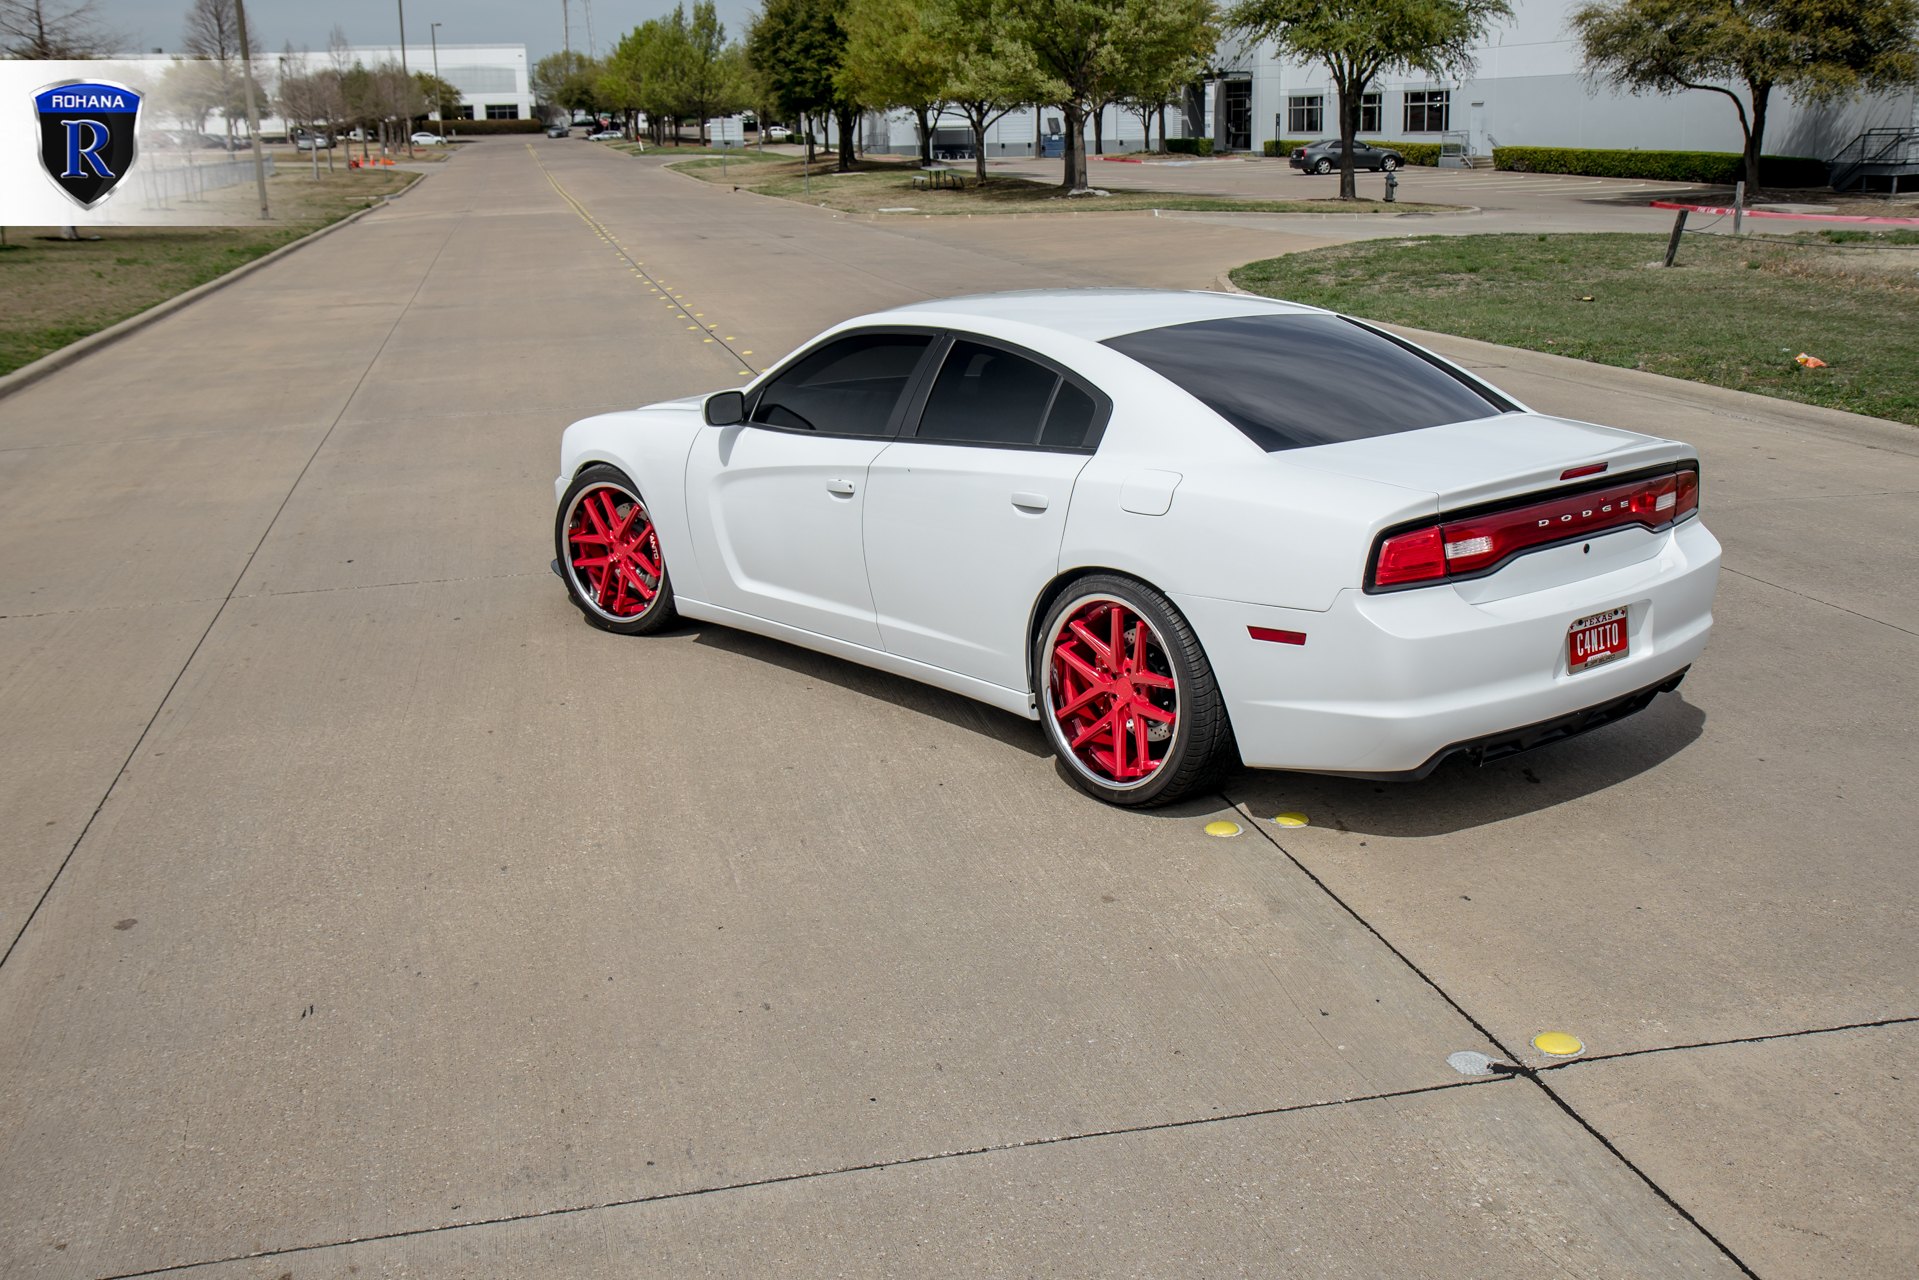 White Dodge Charger with Aftermarket Rear Diffuser - Photo by Rohana Wheels